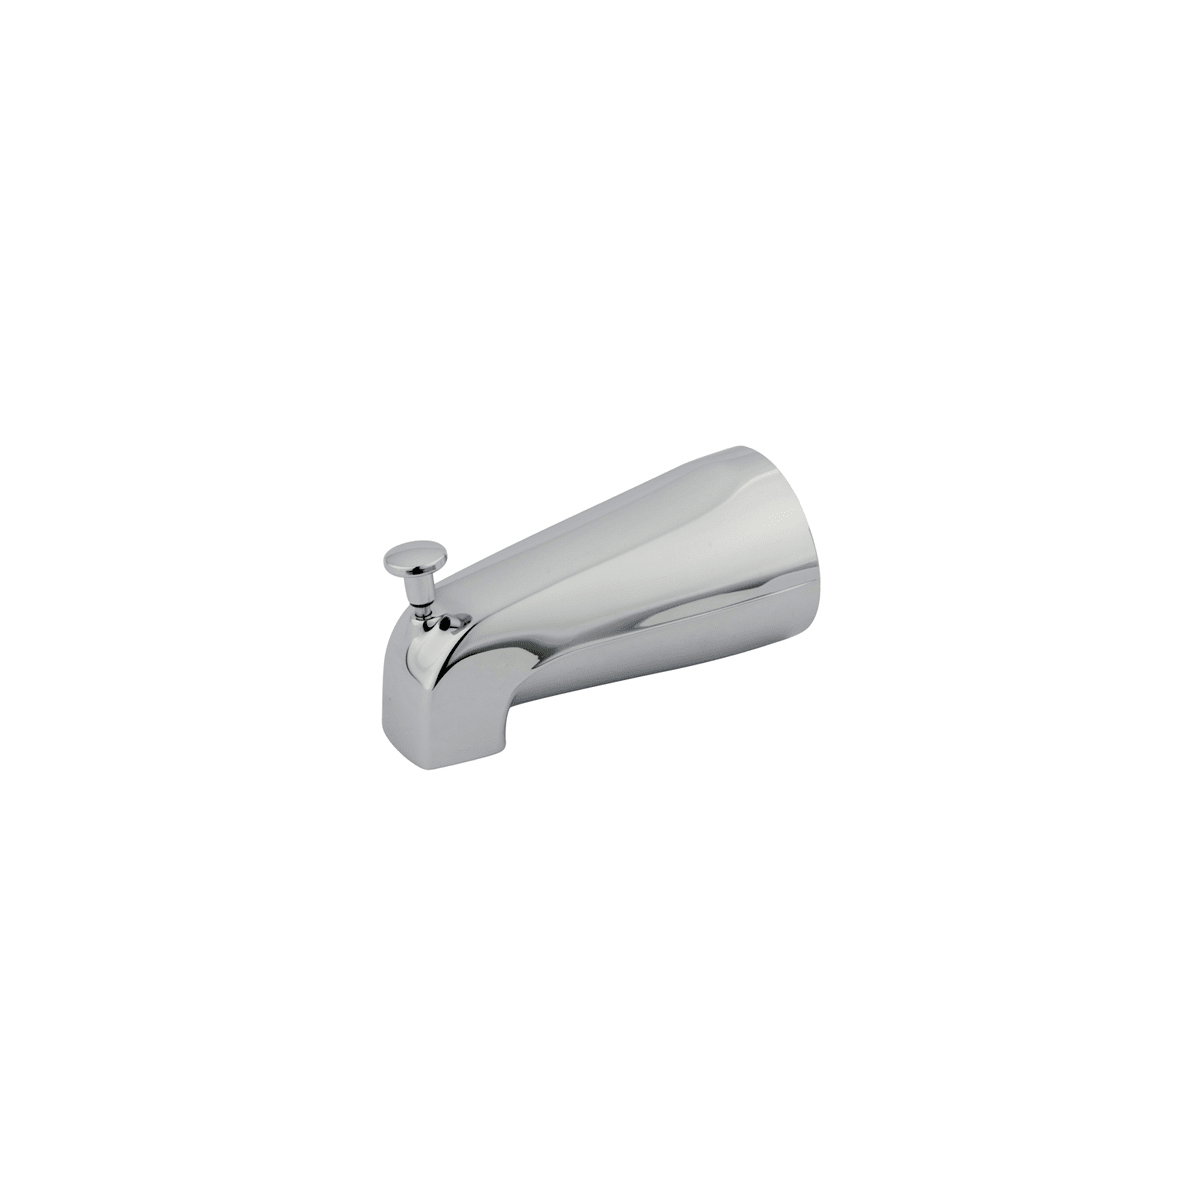 Brushed Nickel Kingston Brass K189A8 5-1/4 Inch Zinc Tub Spout with Diverter 